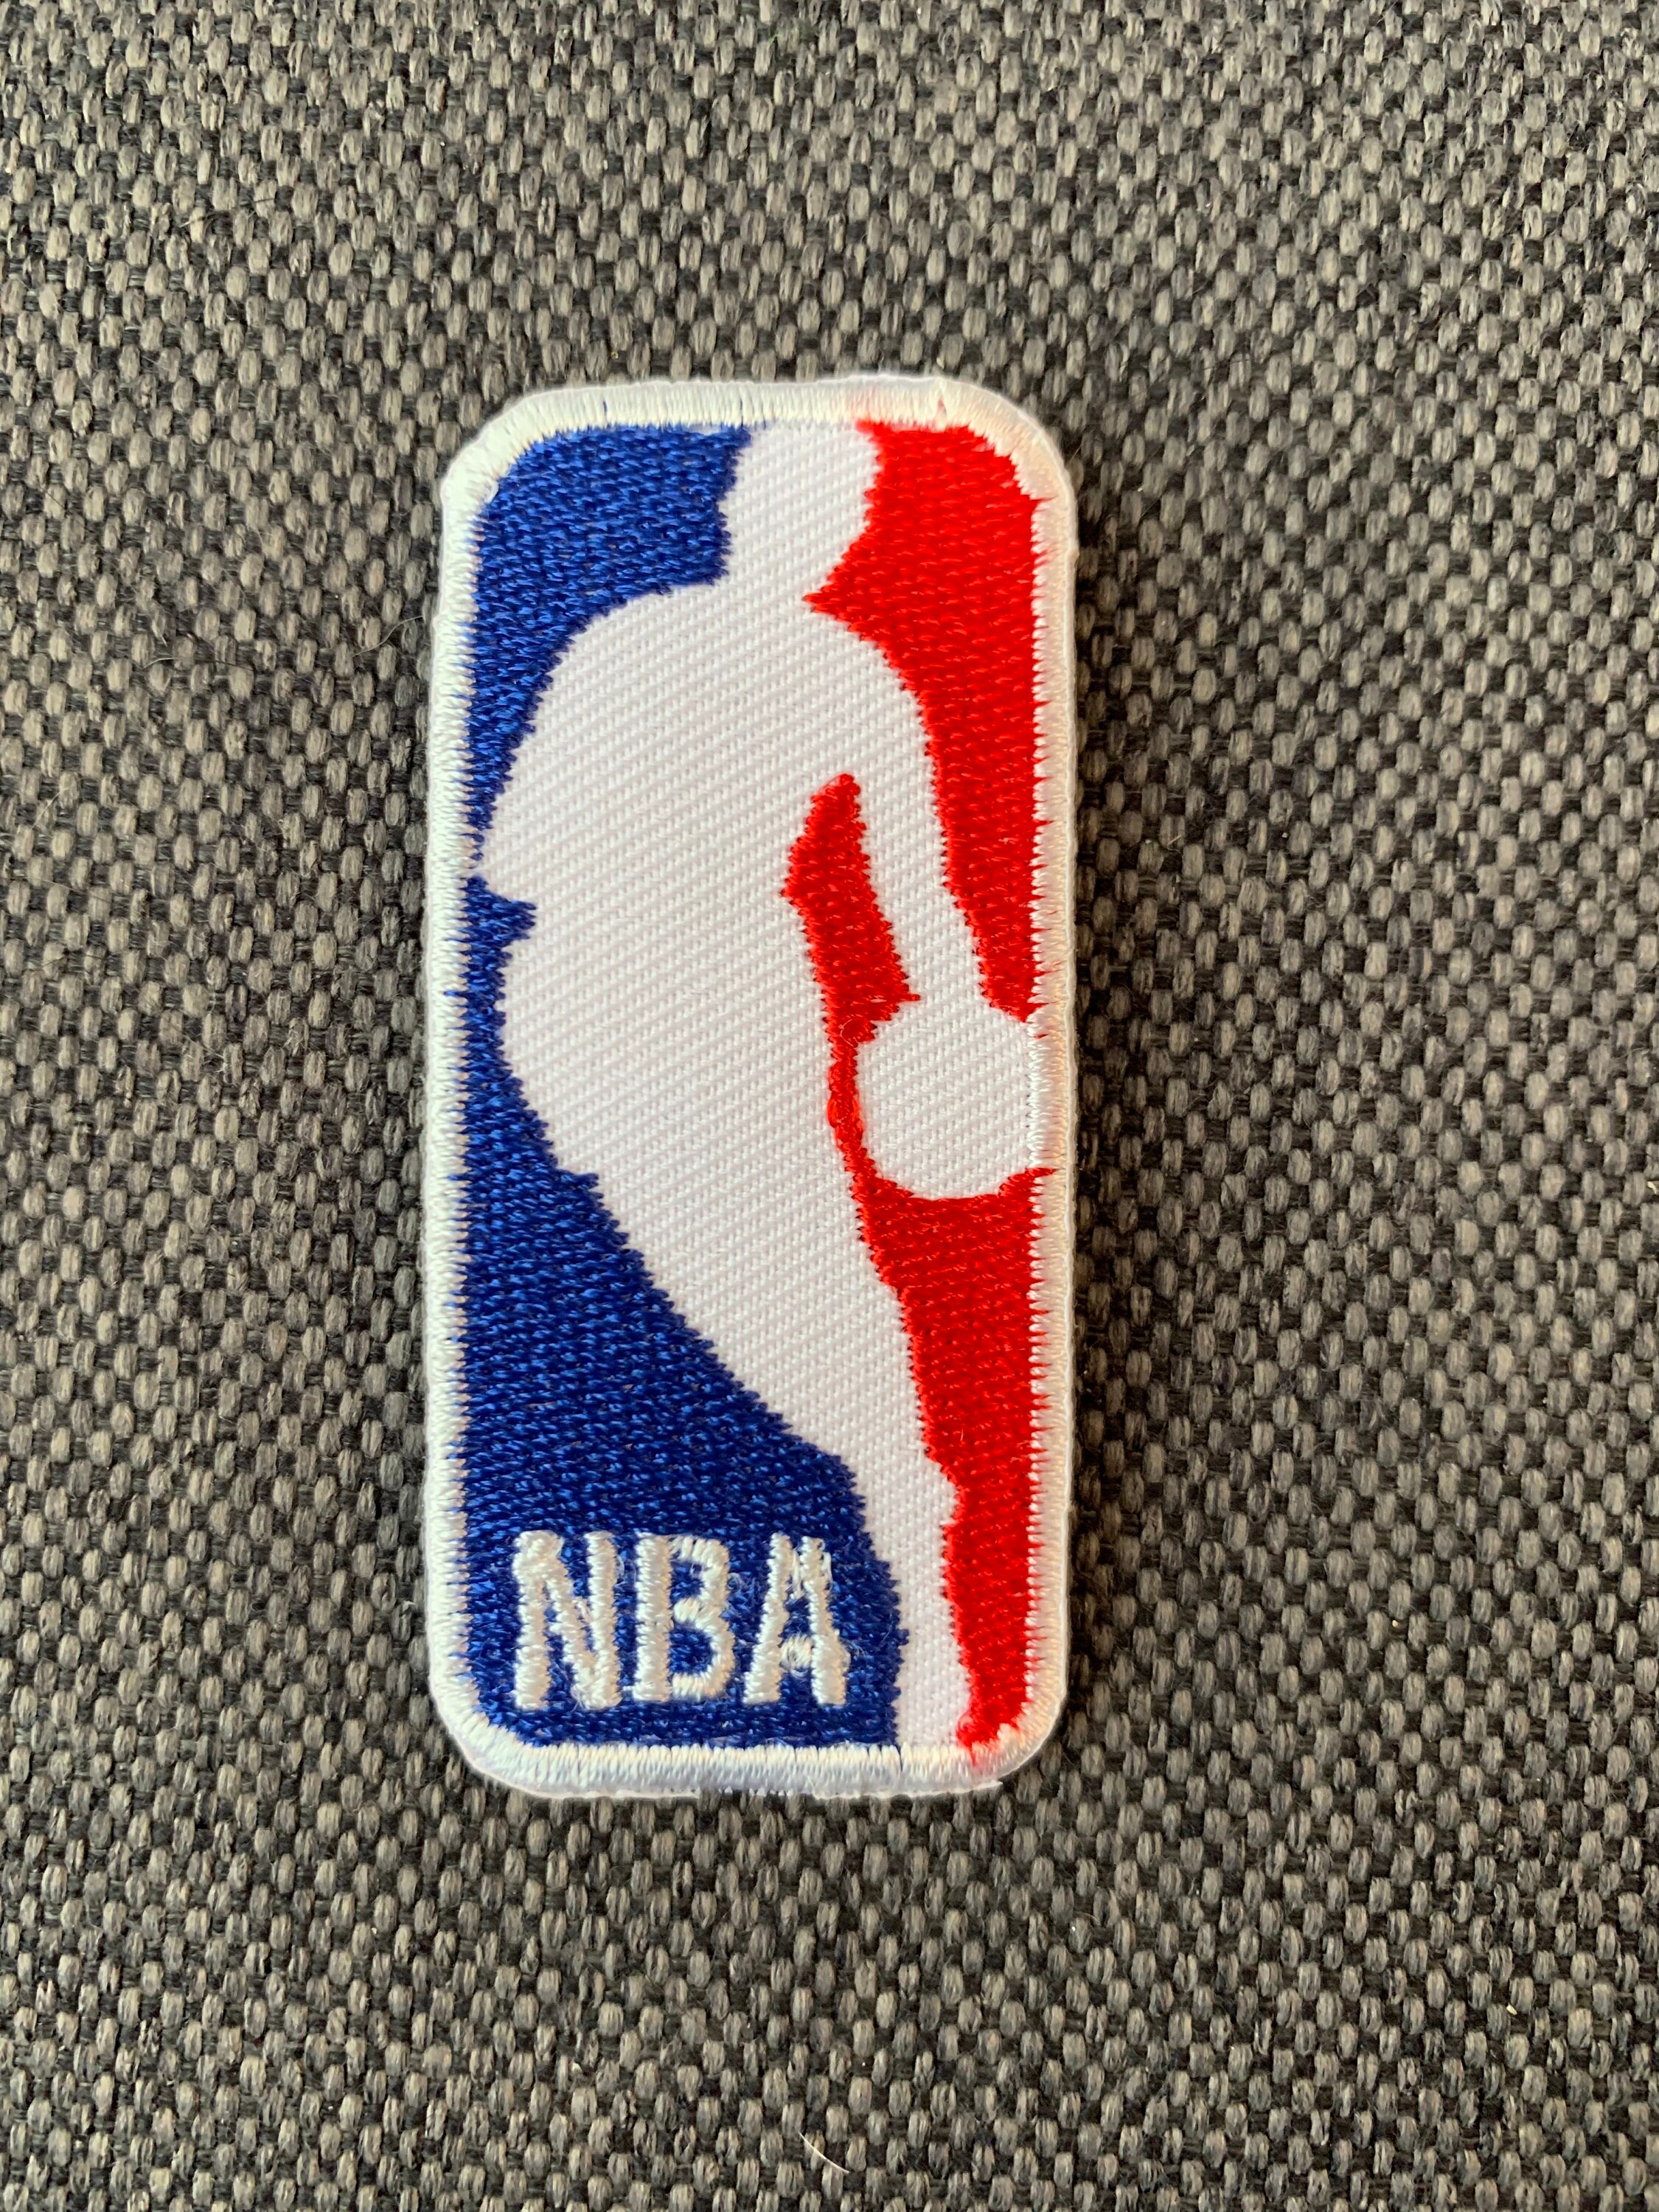 NEW NBA Finals Patch - Logo - NBA Licensed & Packaged - Xtras